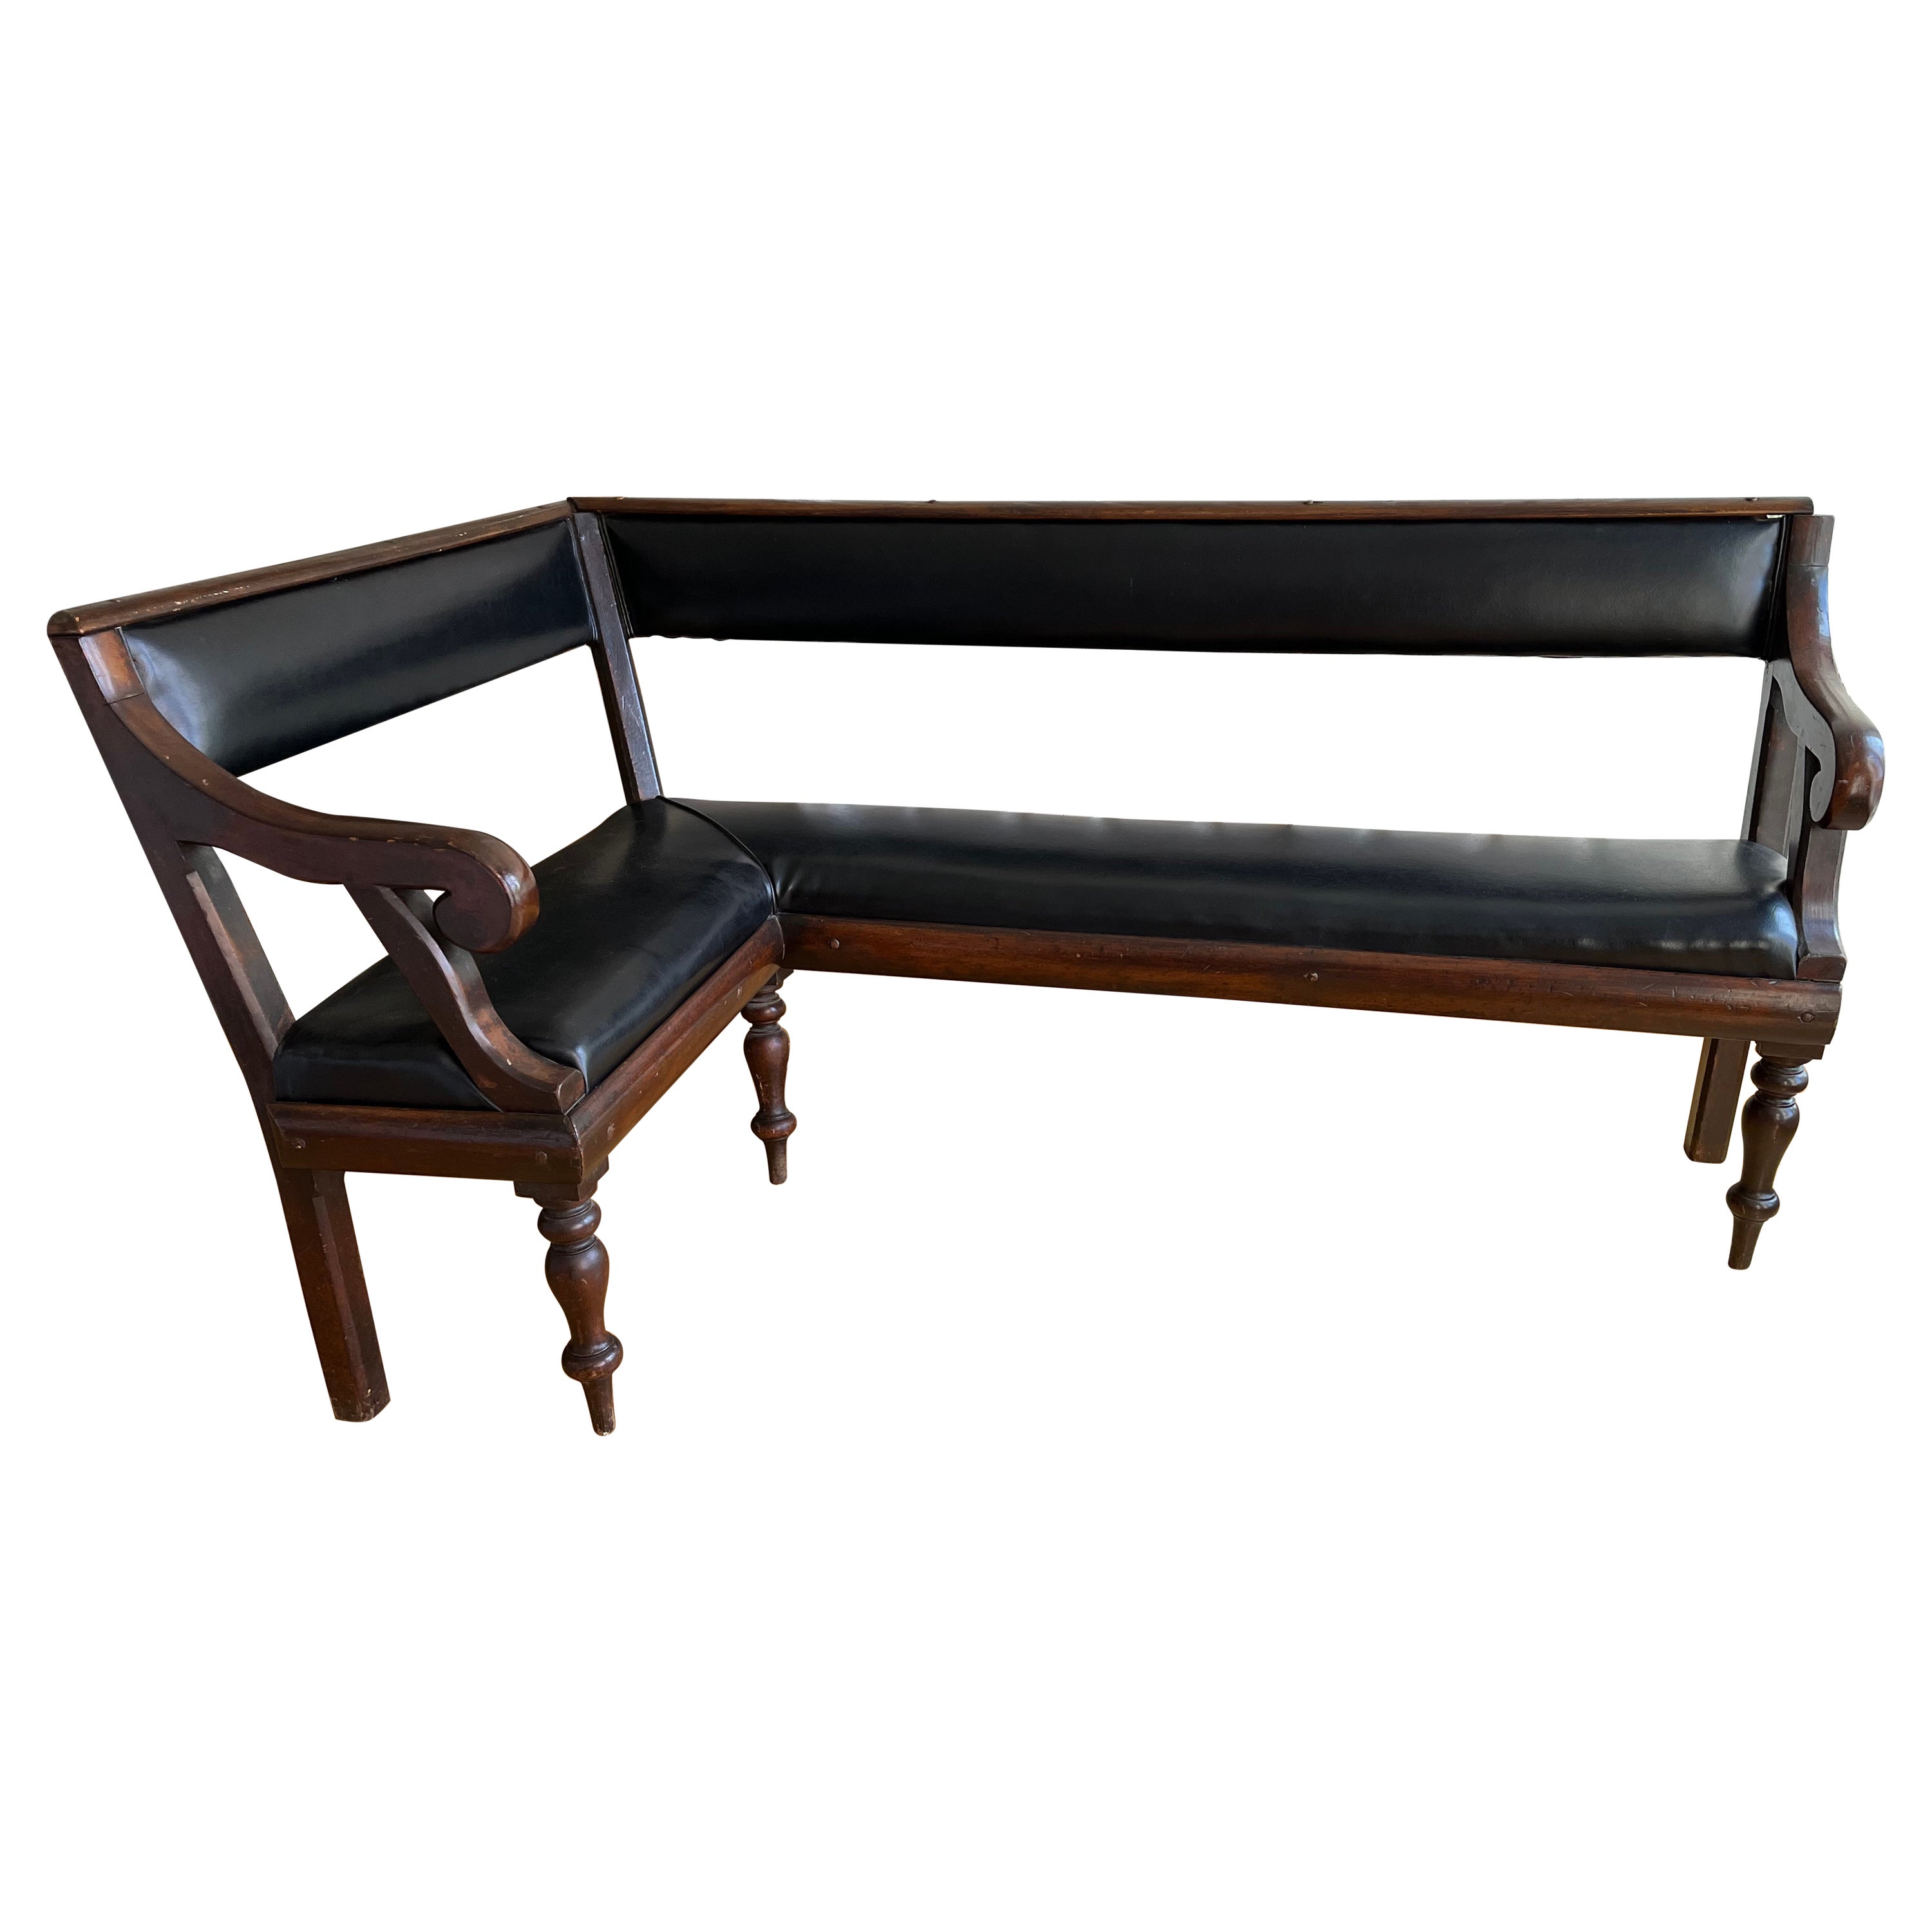 Vintage Leather Banquette/Bench, Early 1900s